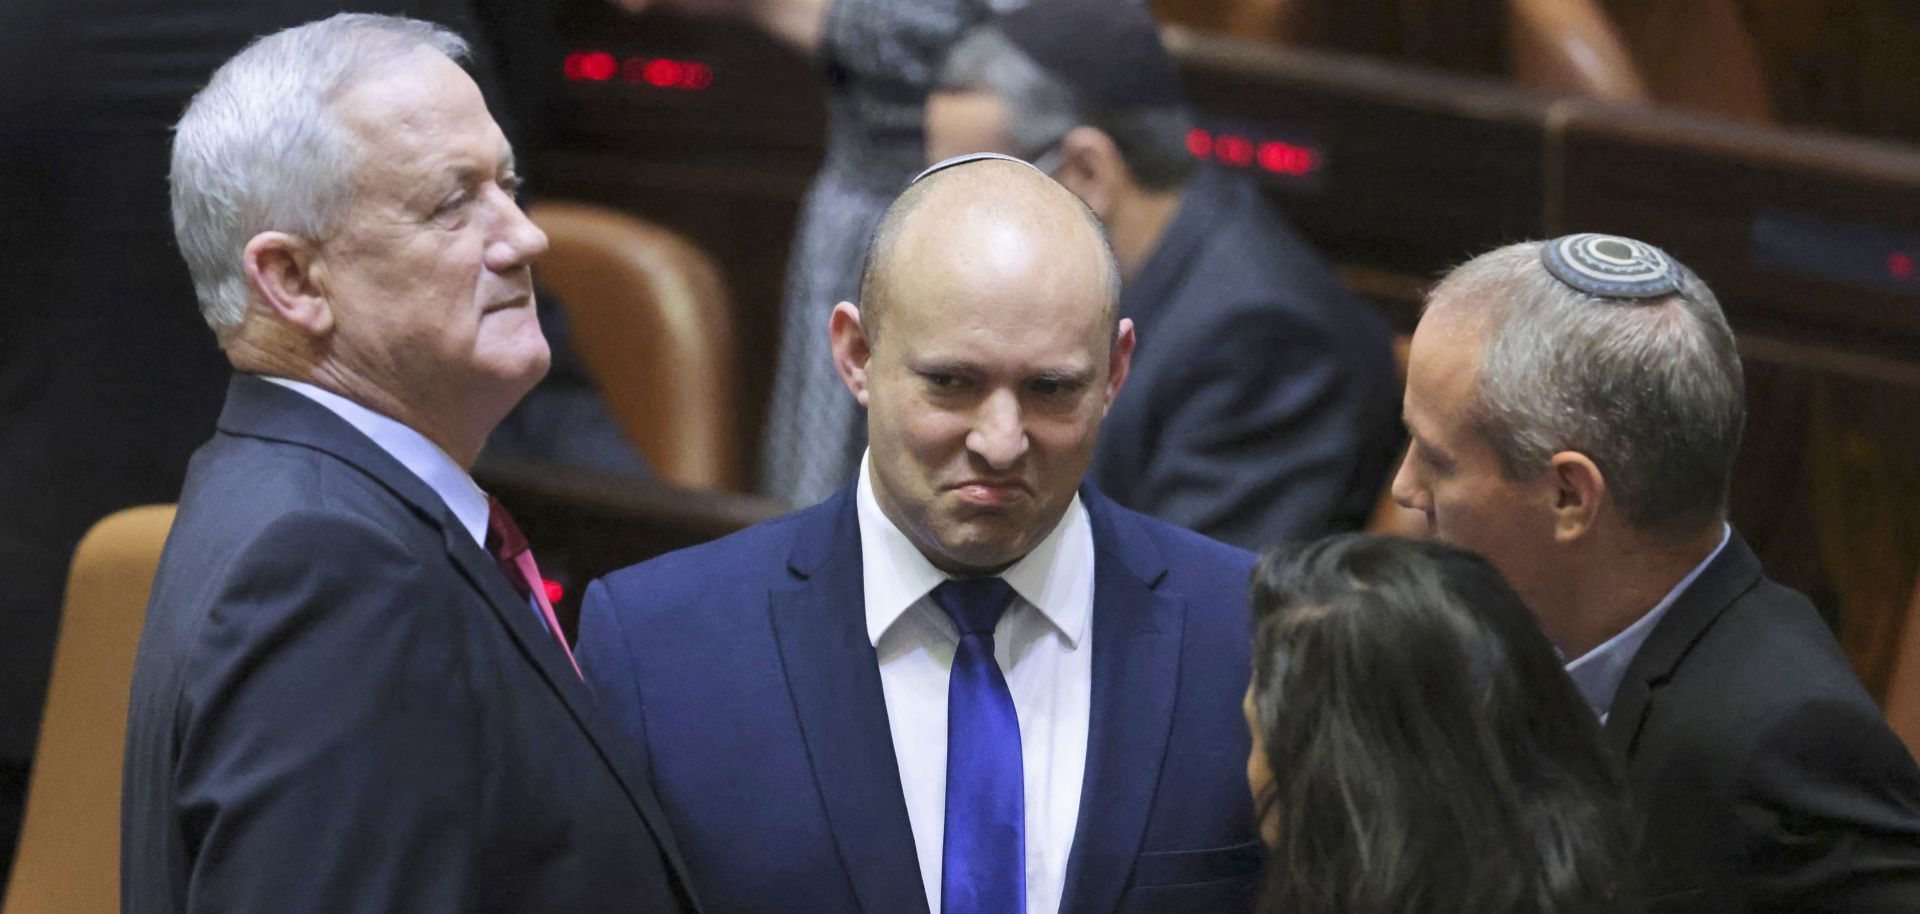 The leader of Israel’s Blue and White party, Benny Gantz (left), speaks with the leader of the right-wing Yamina party, Naftali Bennett (center) on June 2, 2021.